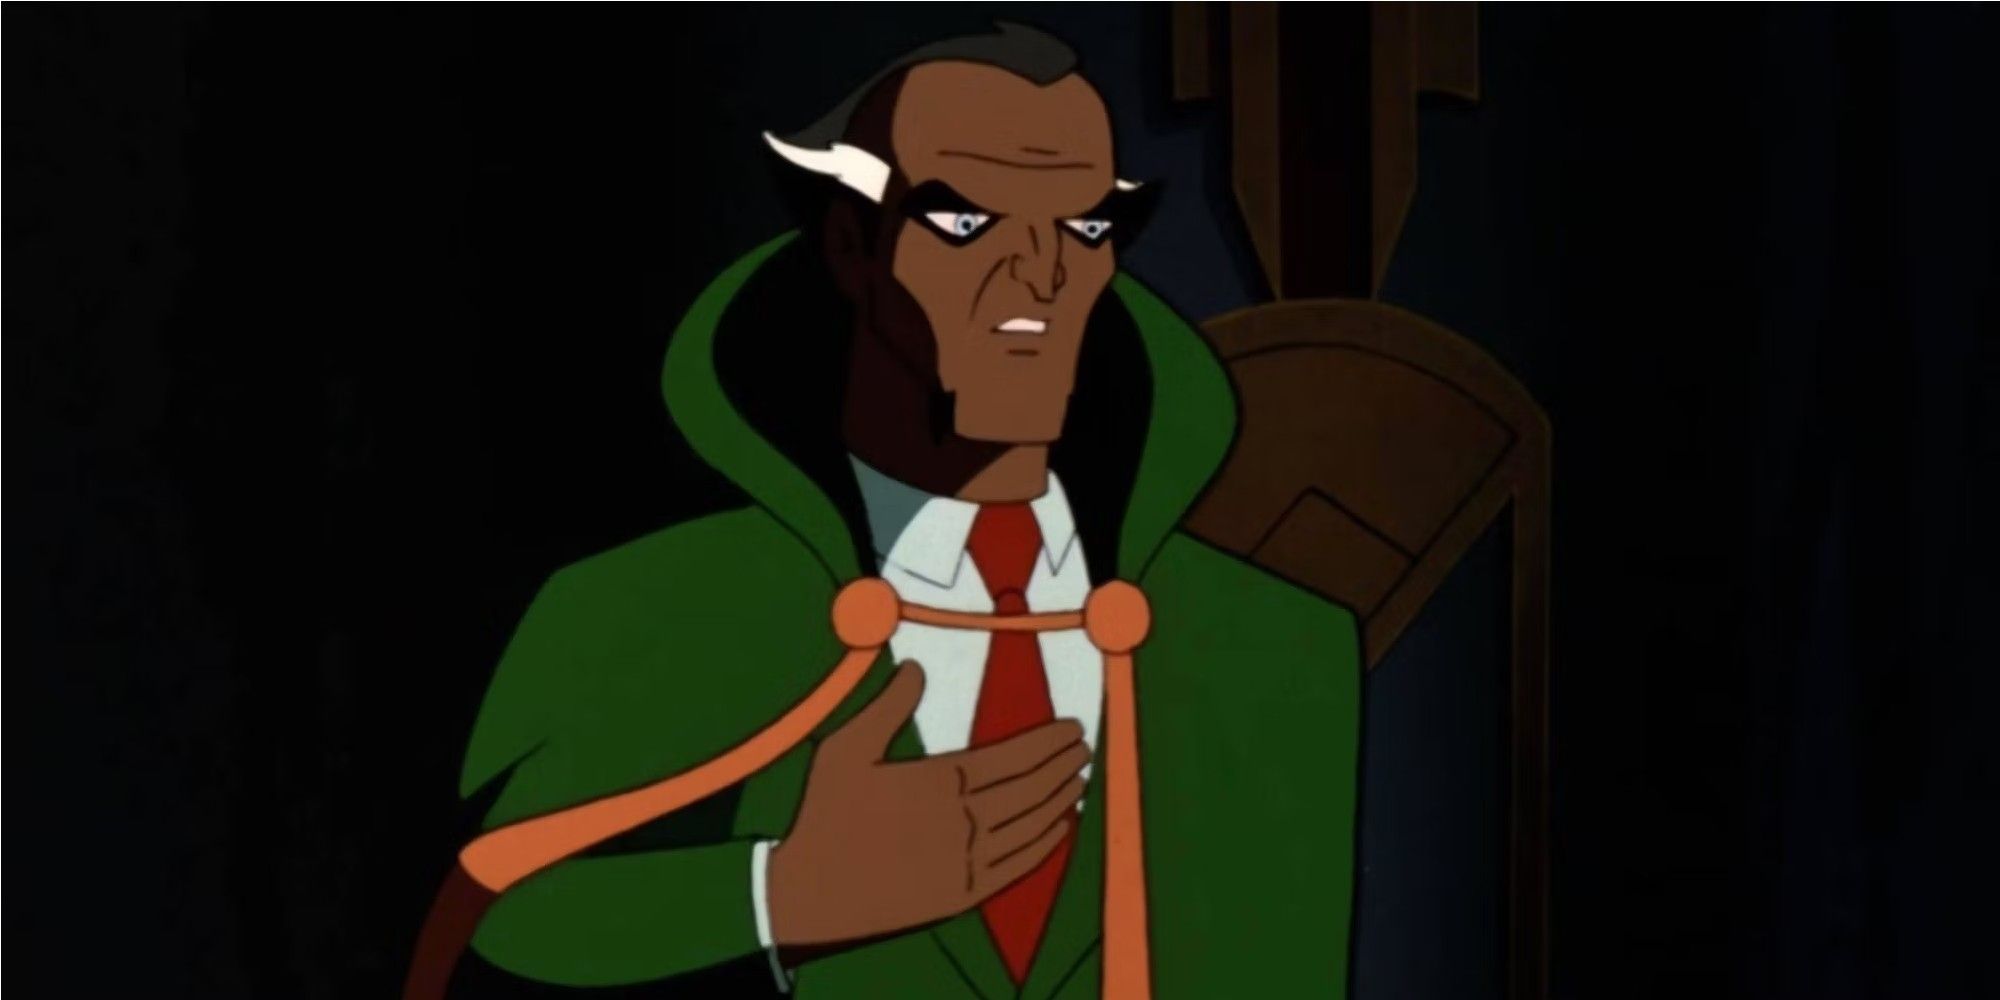 Ra's al ghul looking sinister in batman the animated series